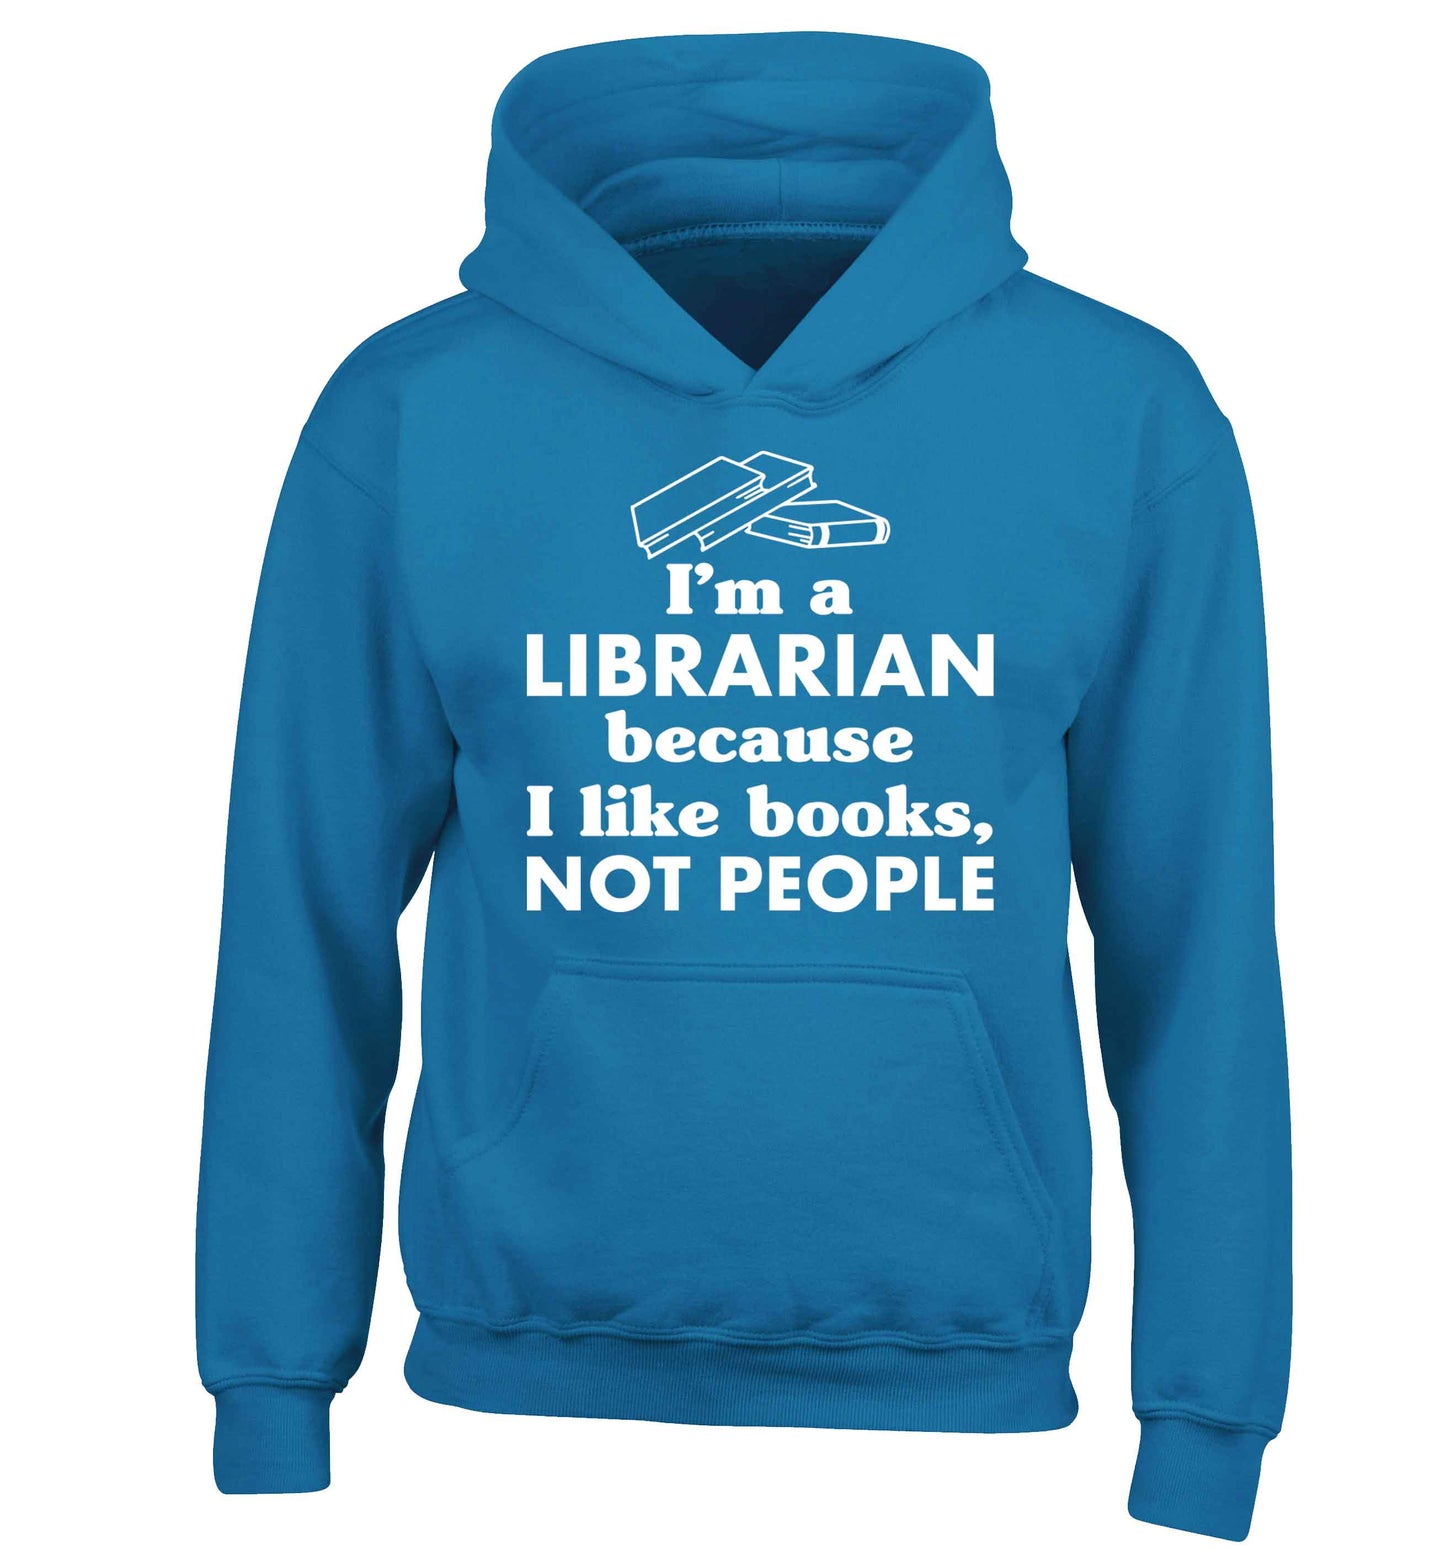 I'm a librarian because I like books not people children's blue hoodie 12-13 Years